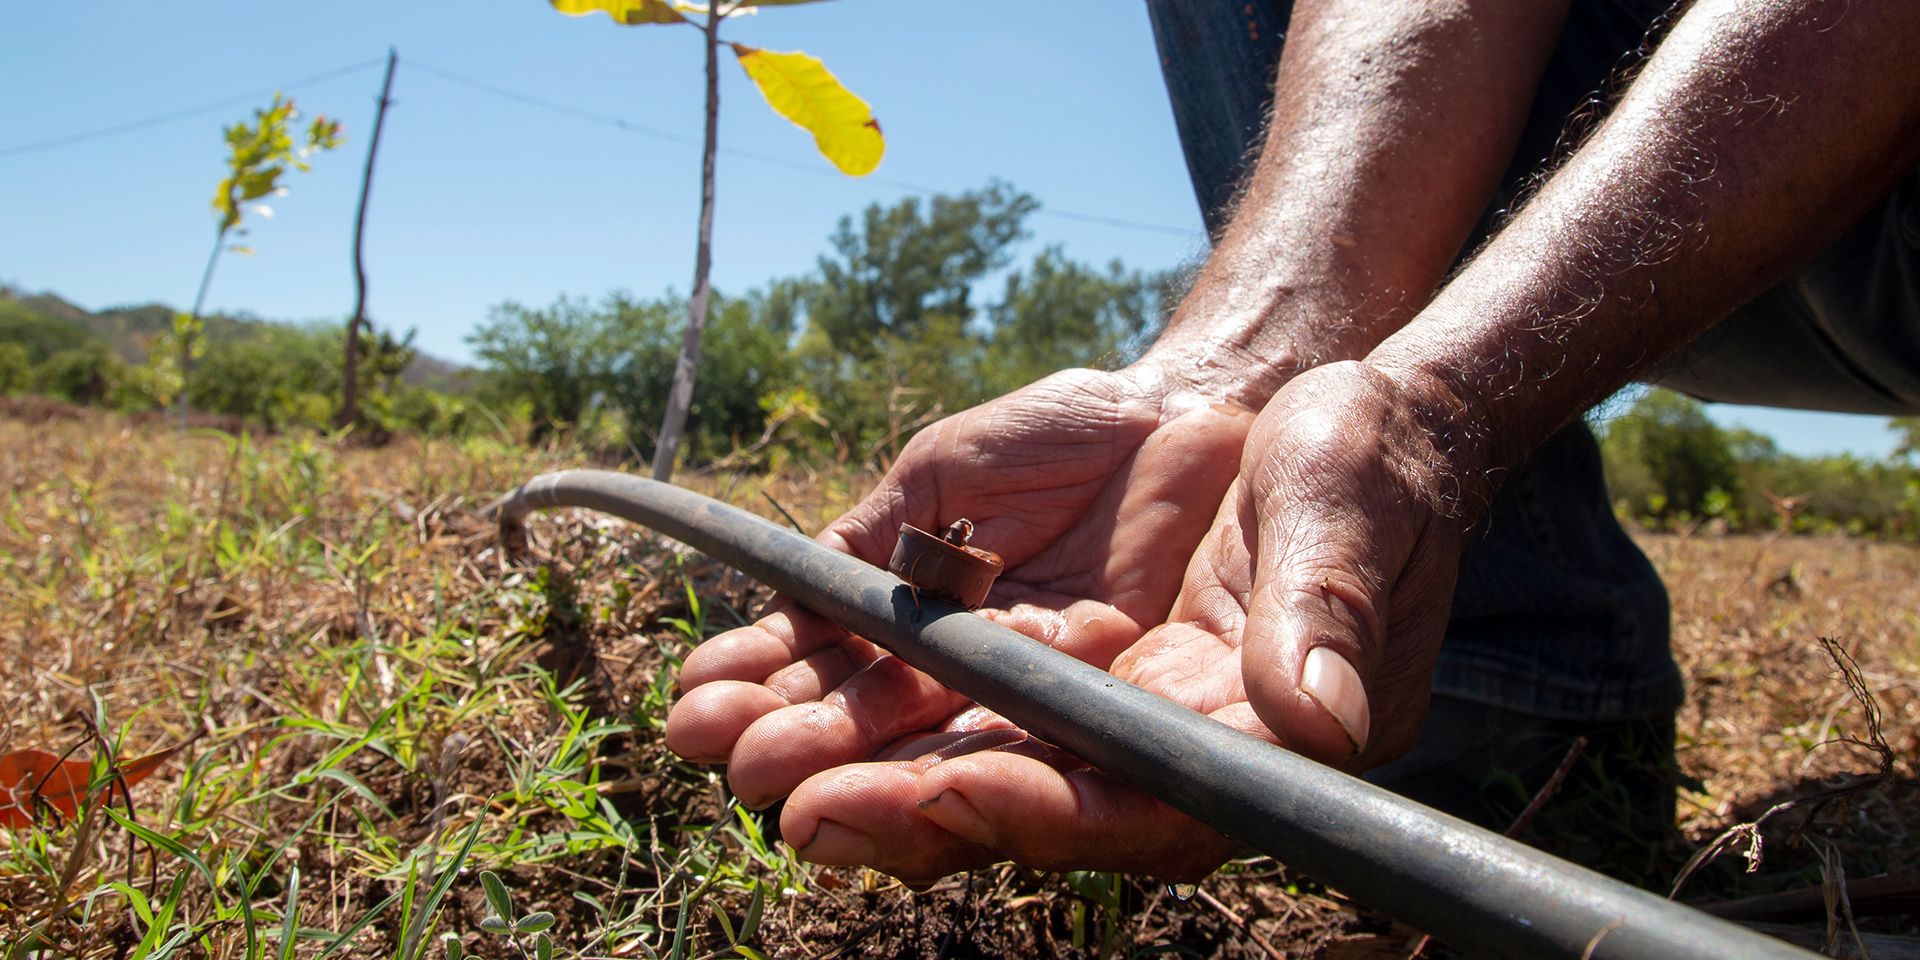 Man hands checking a valve in his irrigation water system 